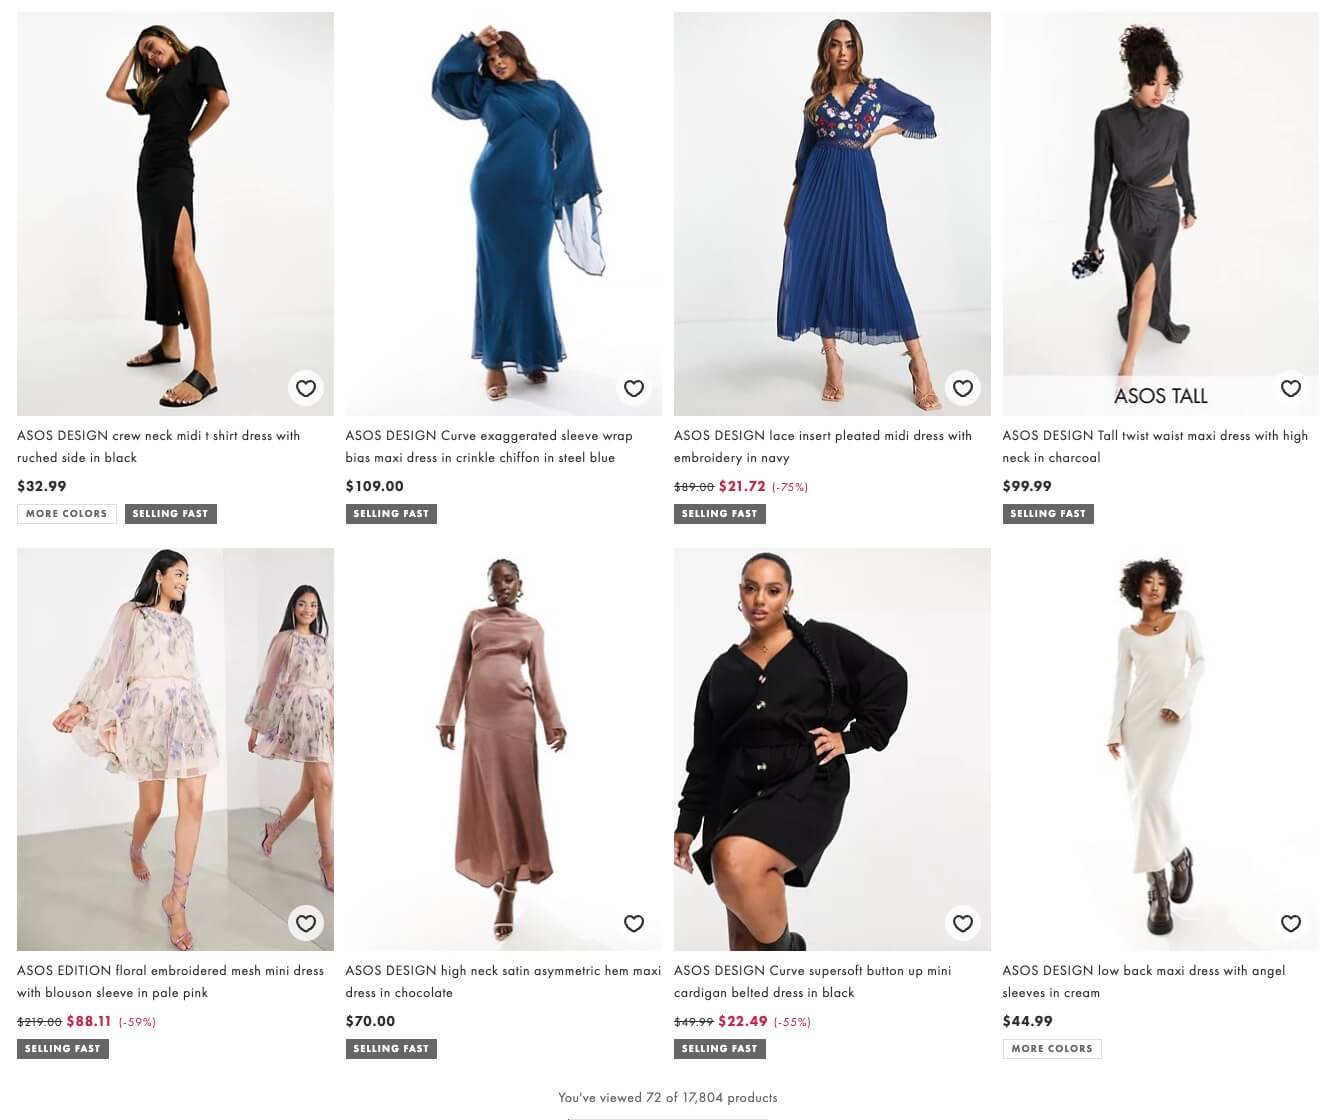 Inclusive models showcasing dresses on the sales page of Asos